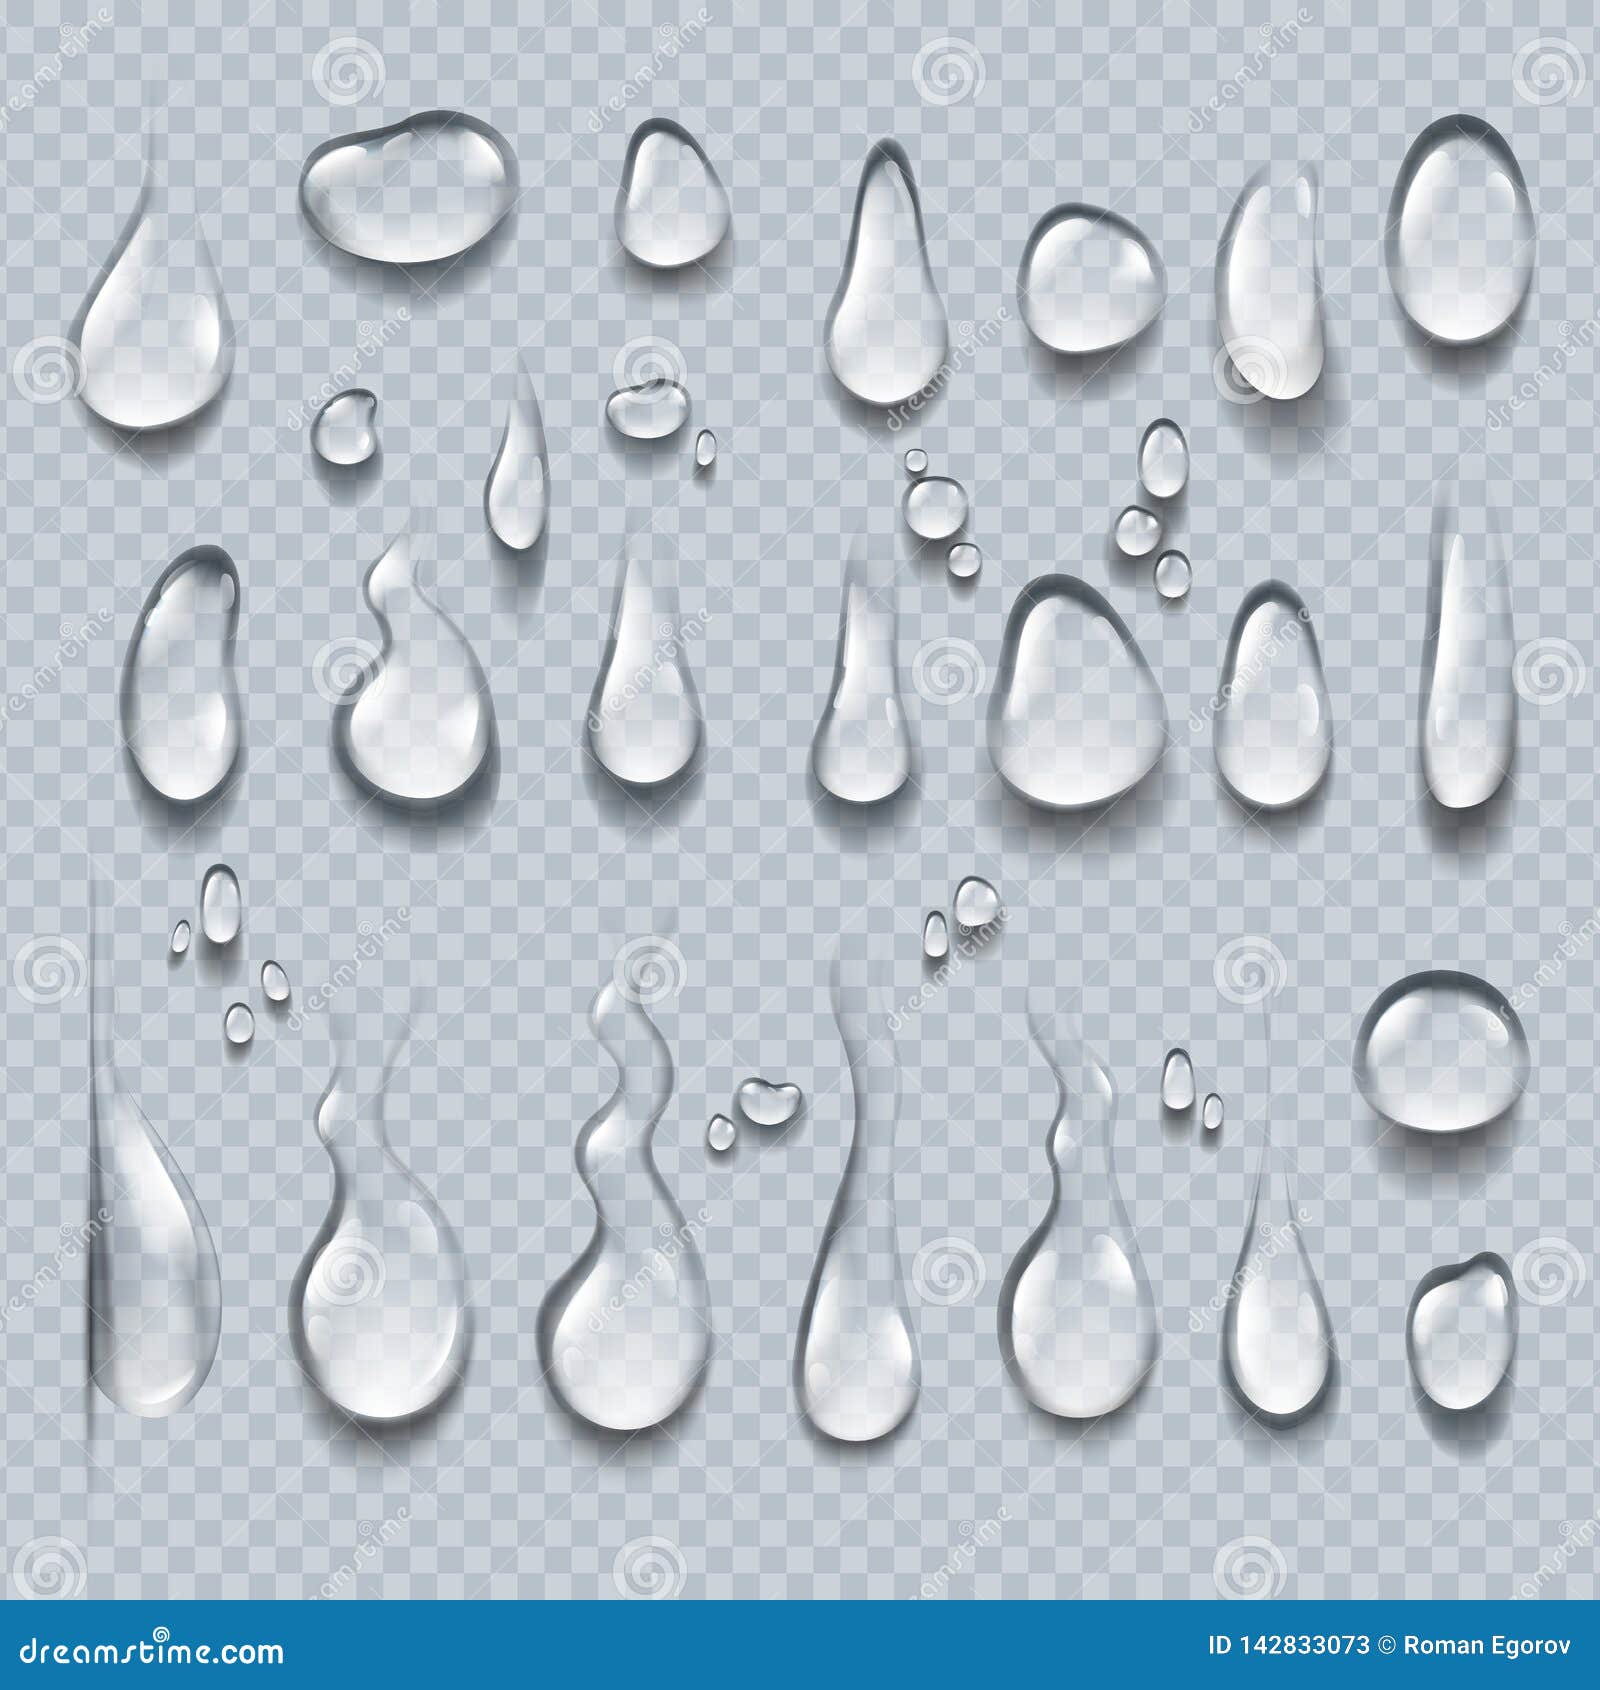 realistic water drops. 3d transparent condensation droplets, bubble collection on clear surface. rain drops 